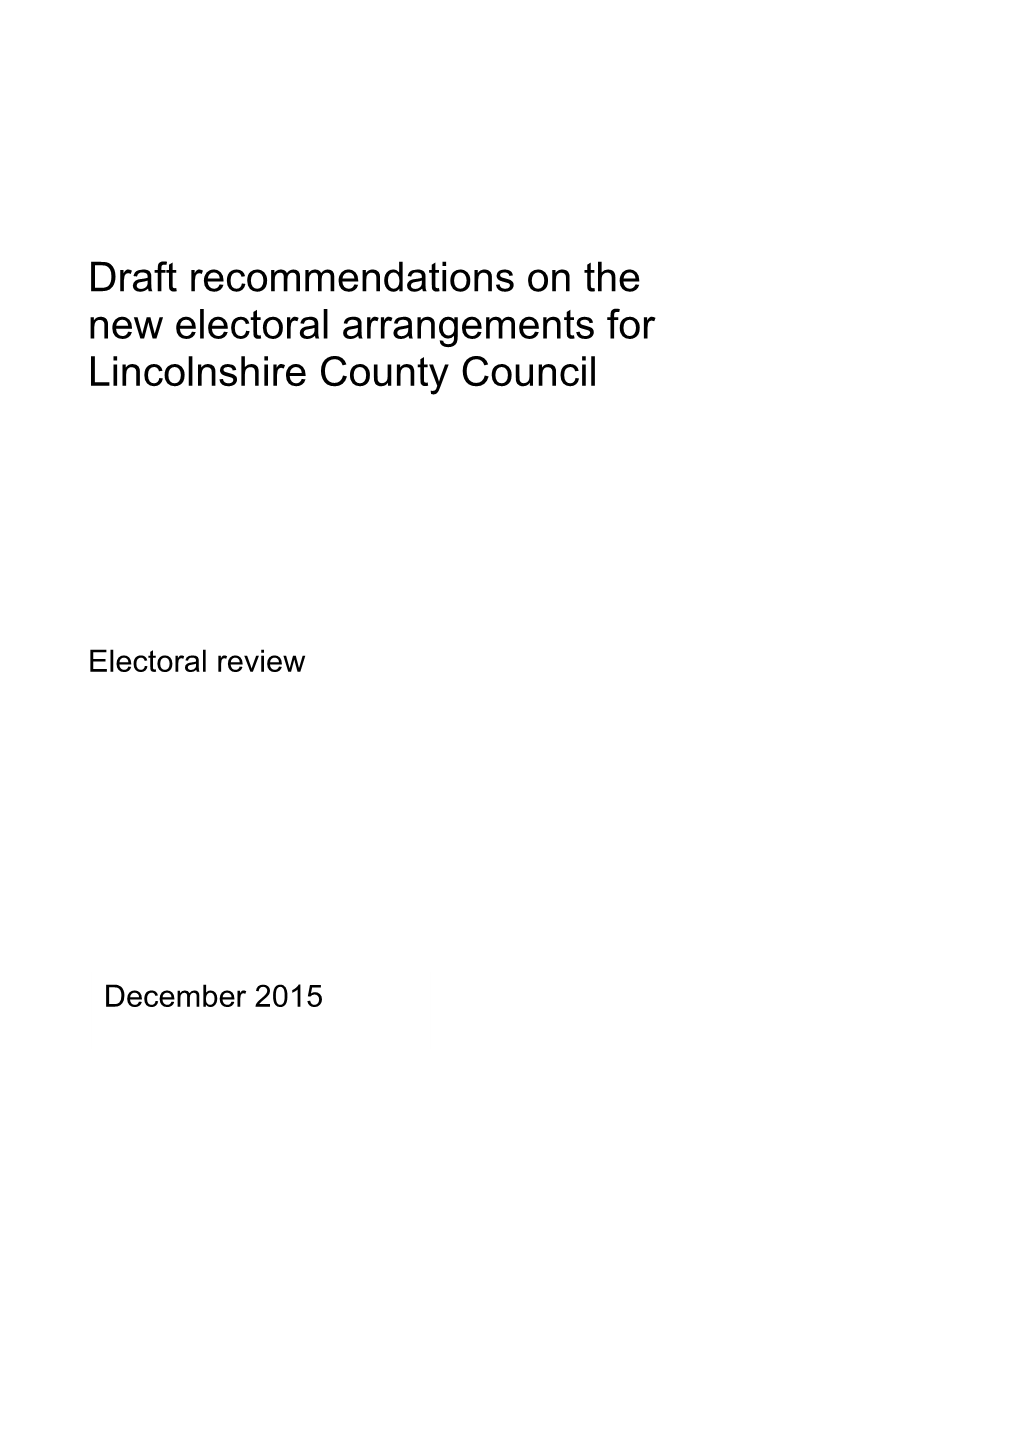 Draft Recommendations for Lincolnshire County Council